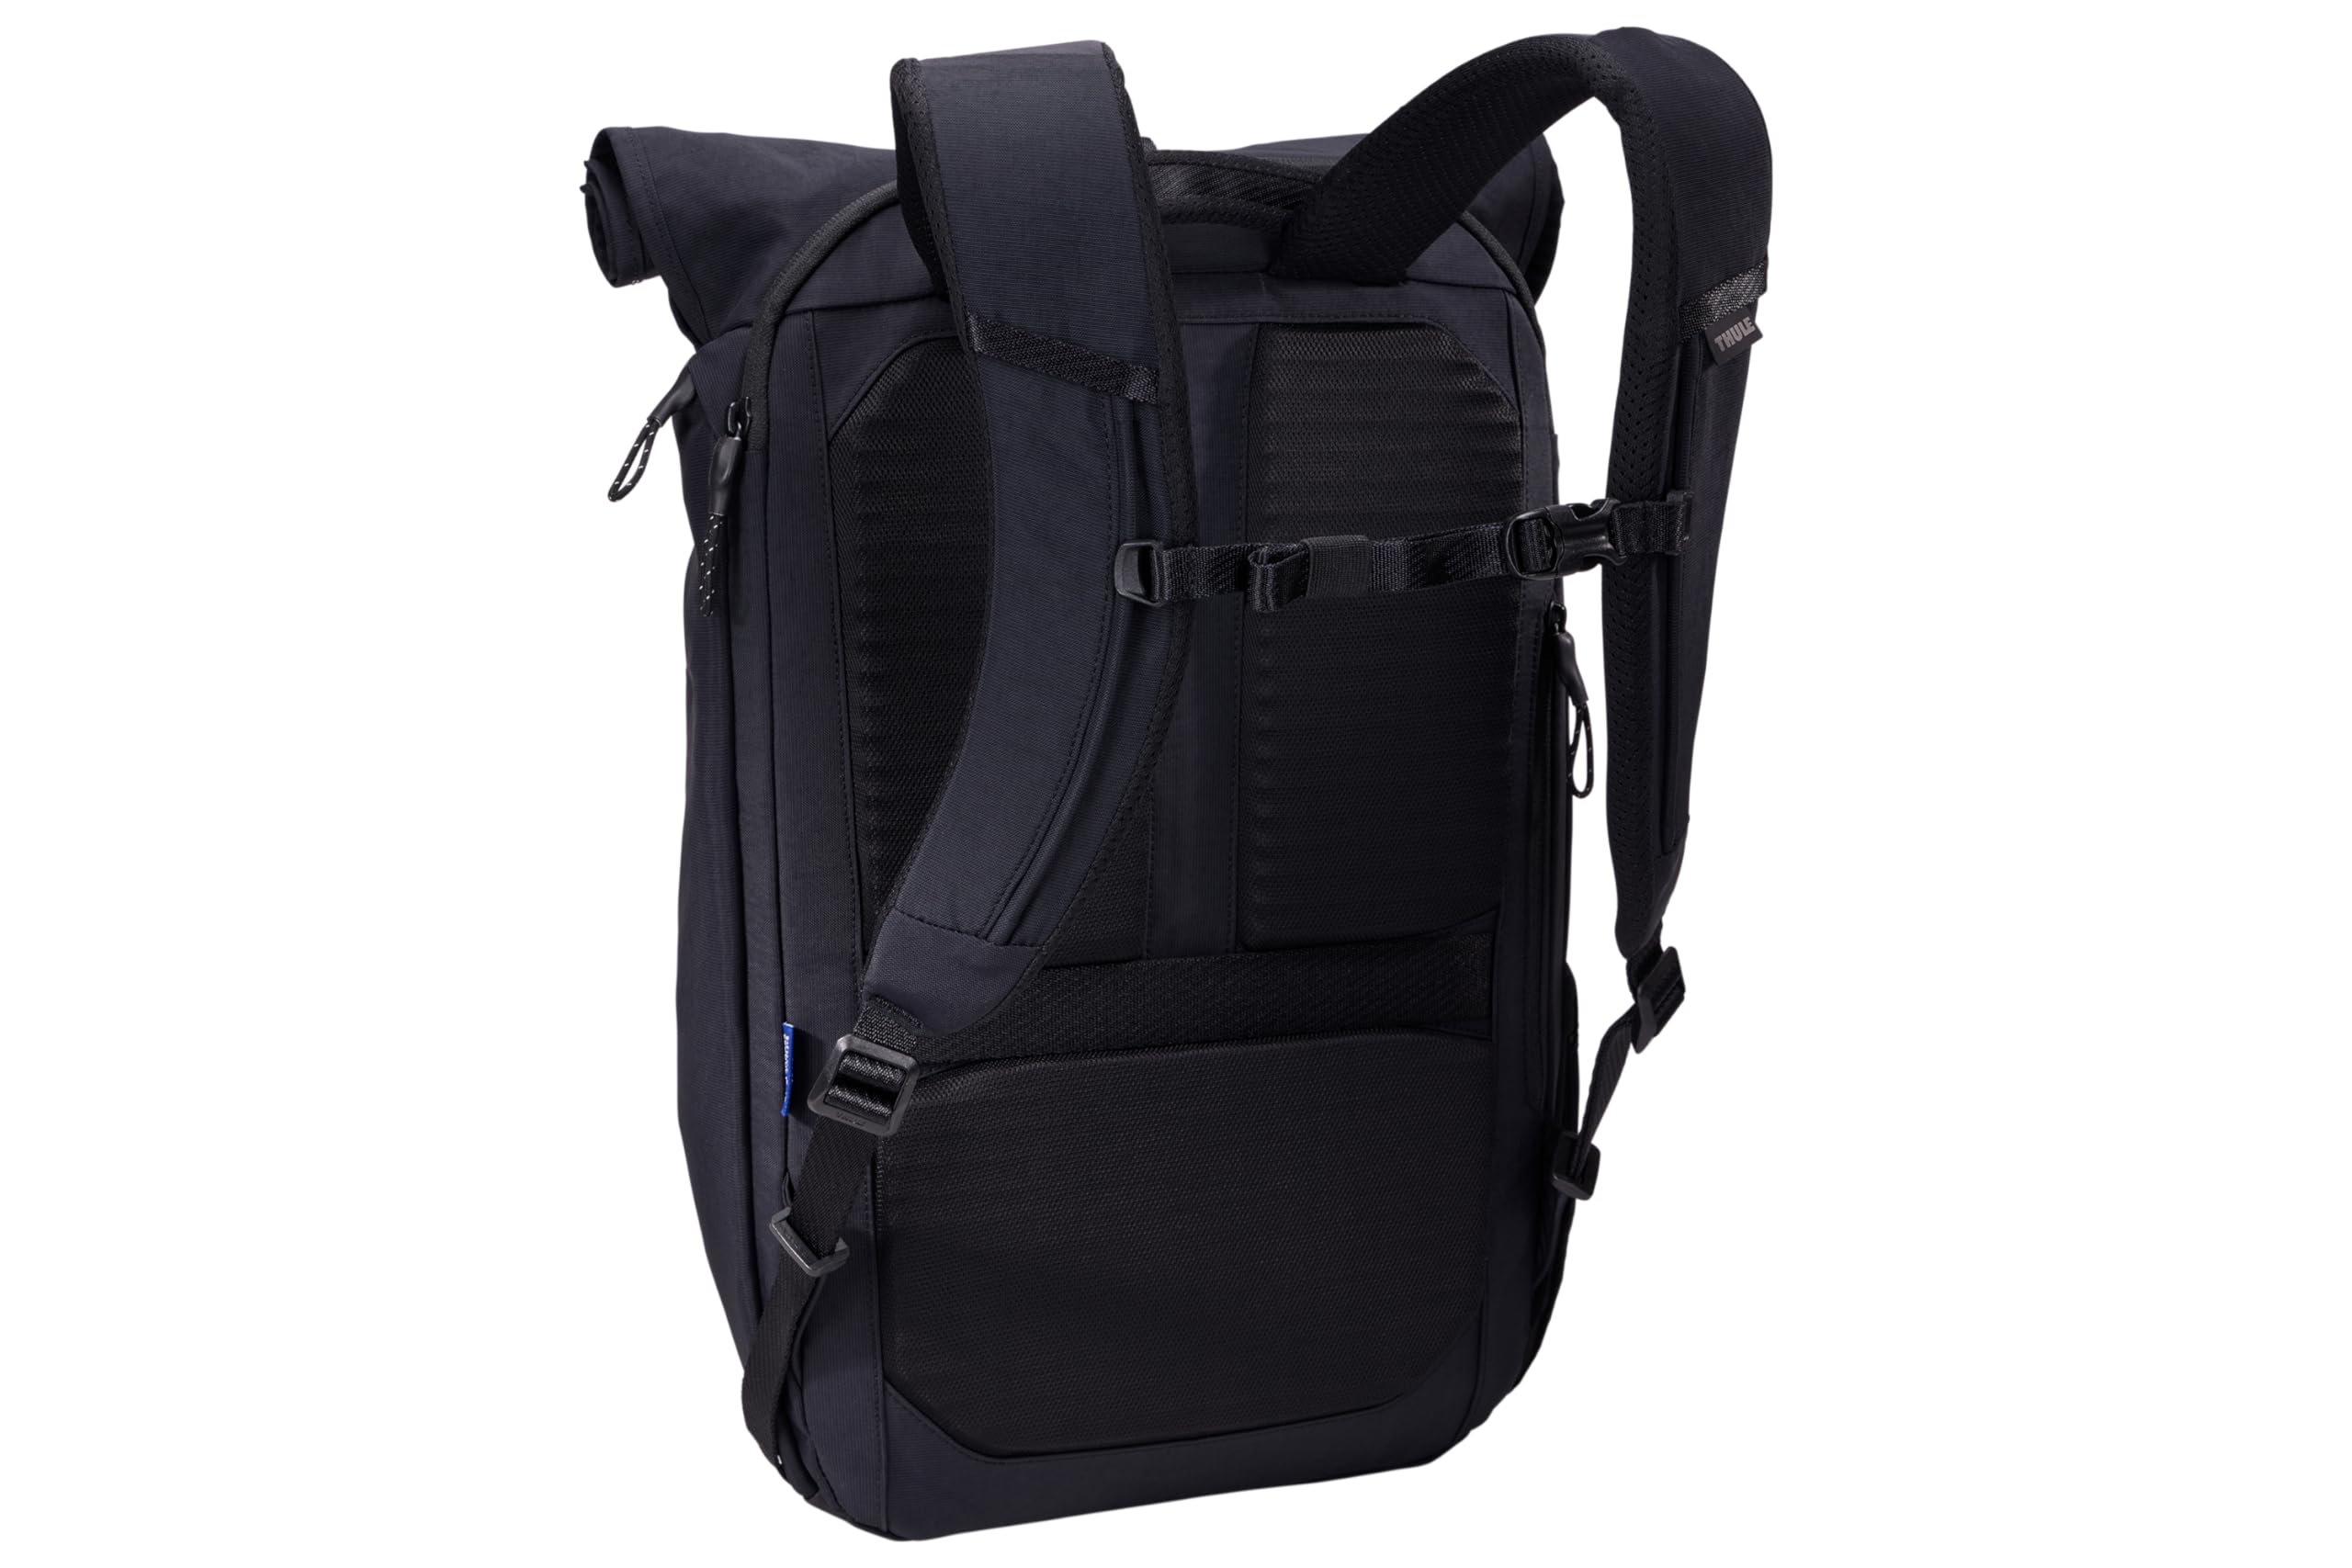 Thule Paramount 24L Backpack - Commuter Backpack with Padded Laptop Sleeve - Fits 16" laptops and 12" Tablets - Thoughtful Layout and Organization